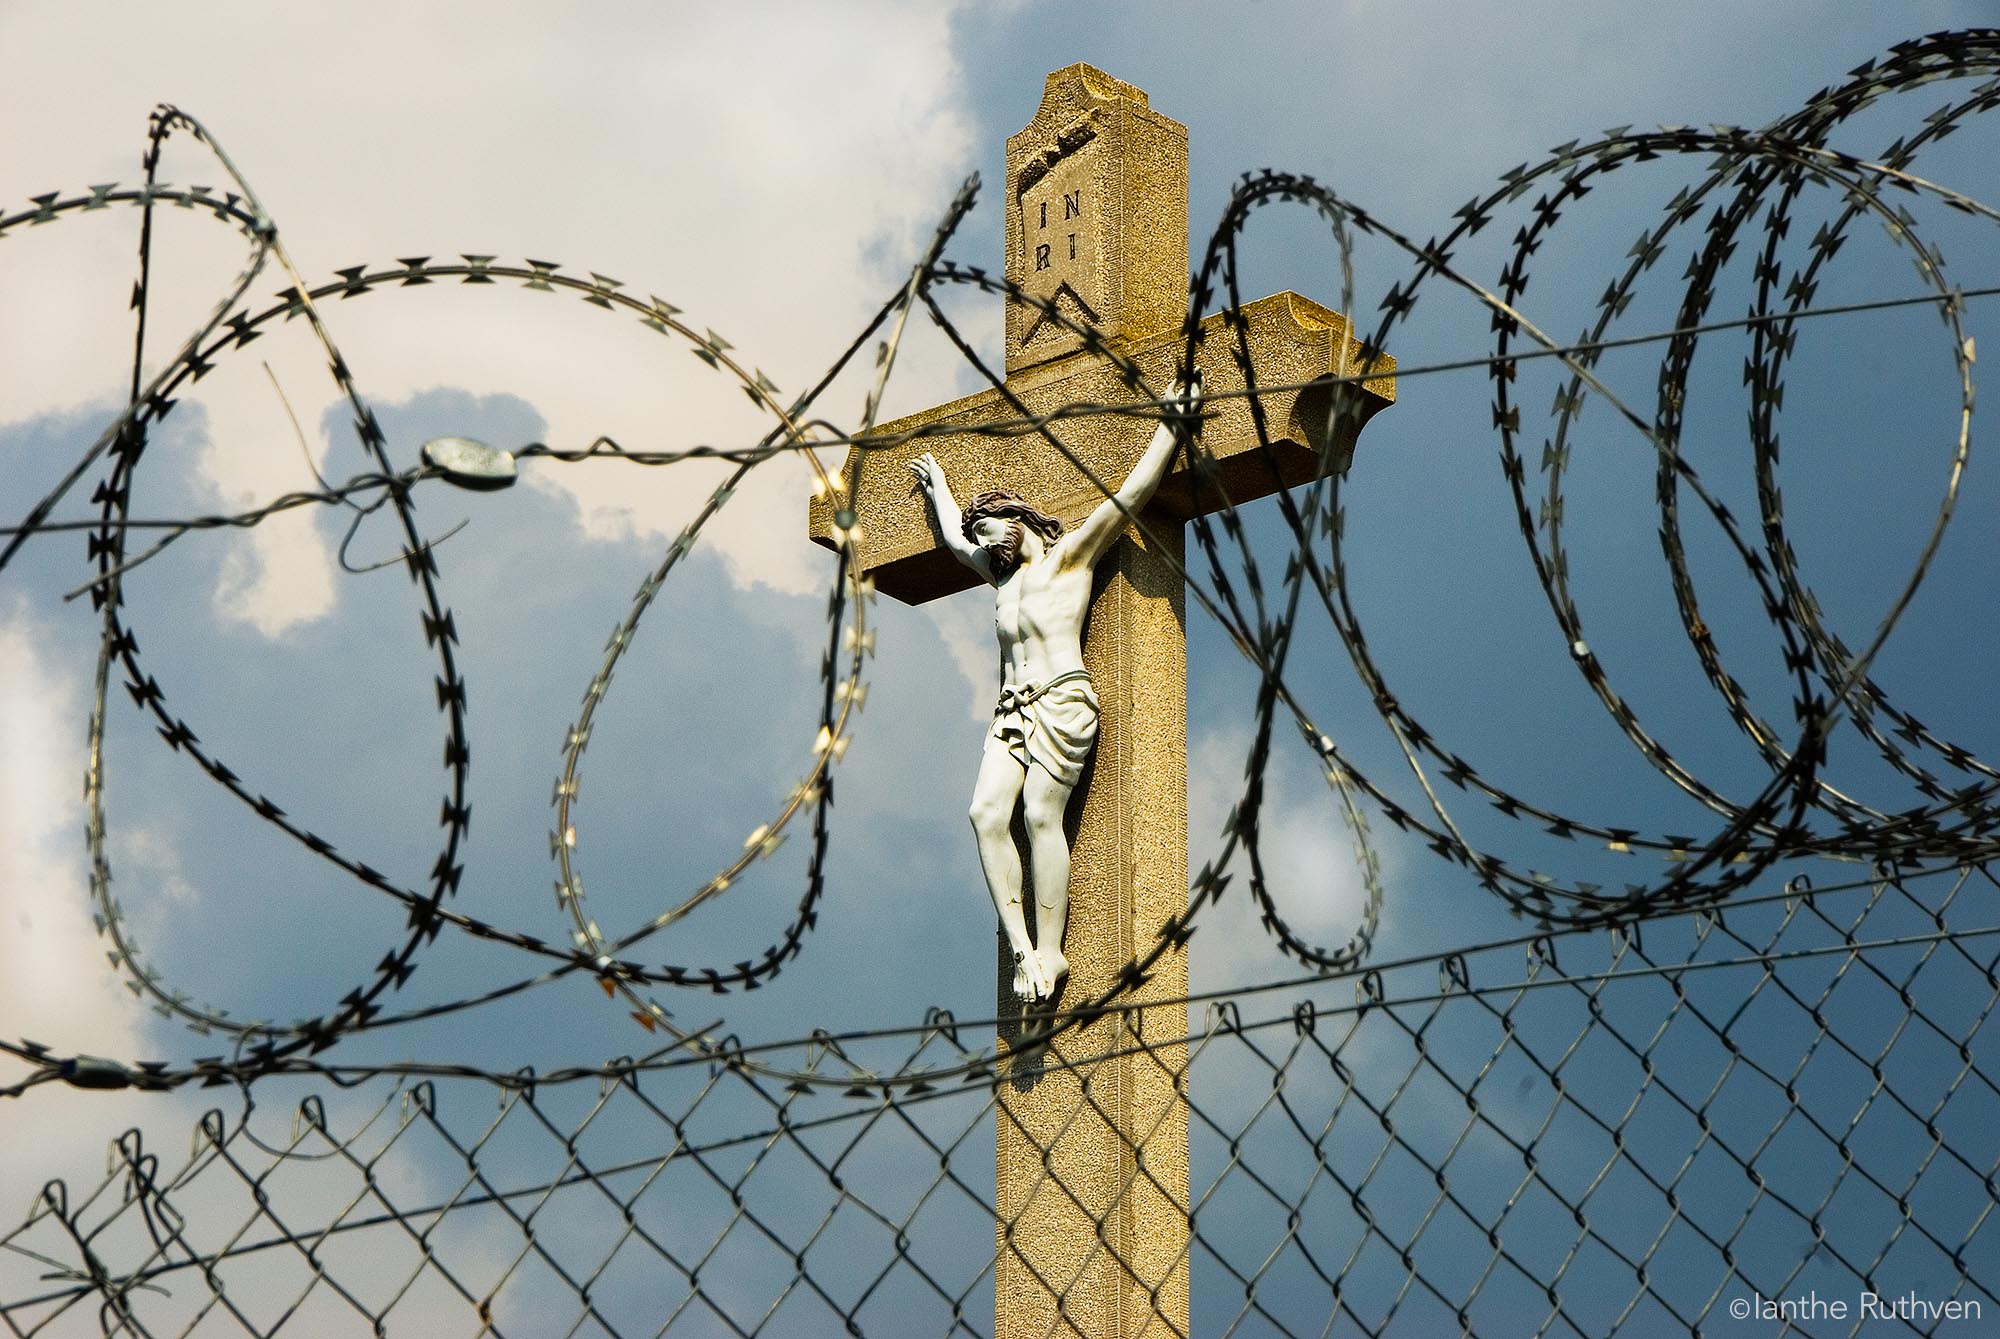 Hungarian Crucifix from Serbian side of the fence